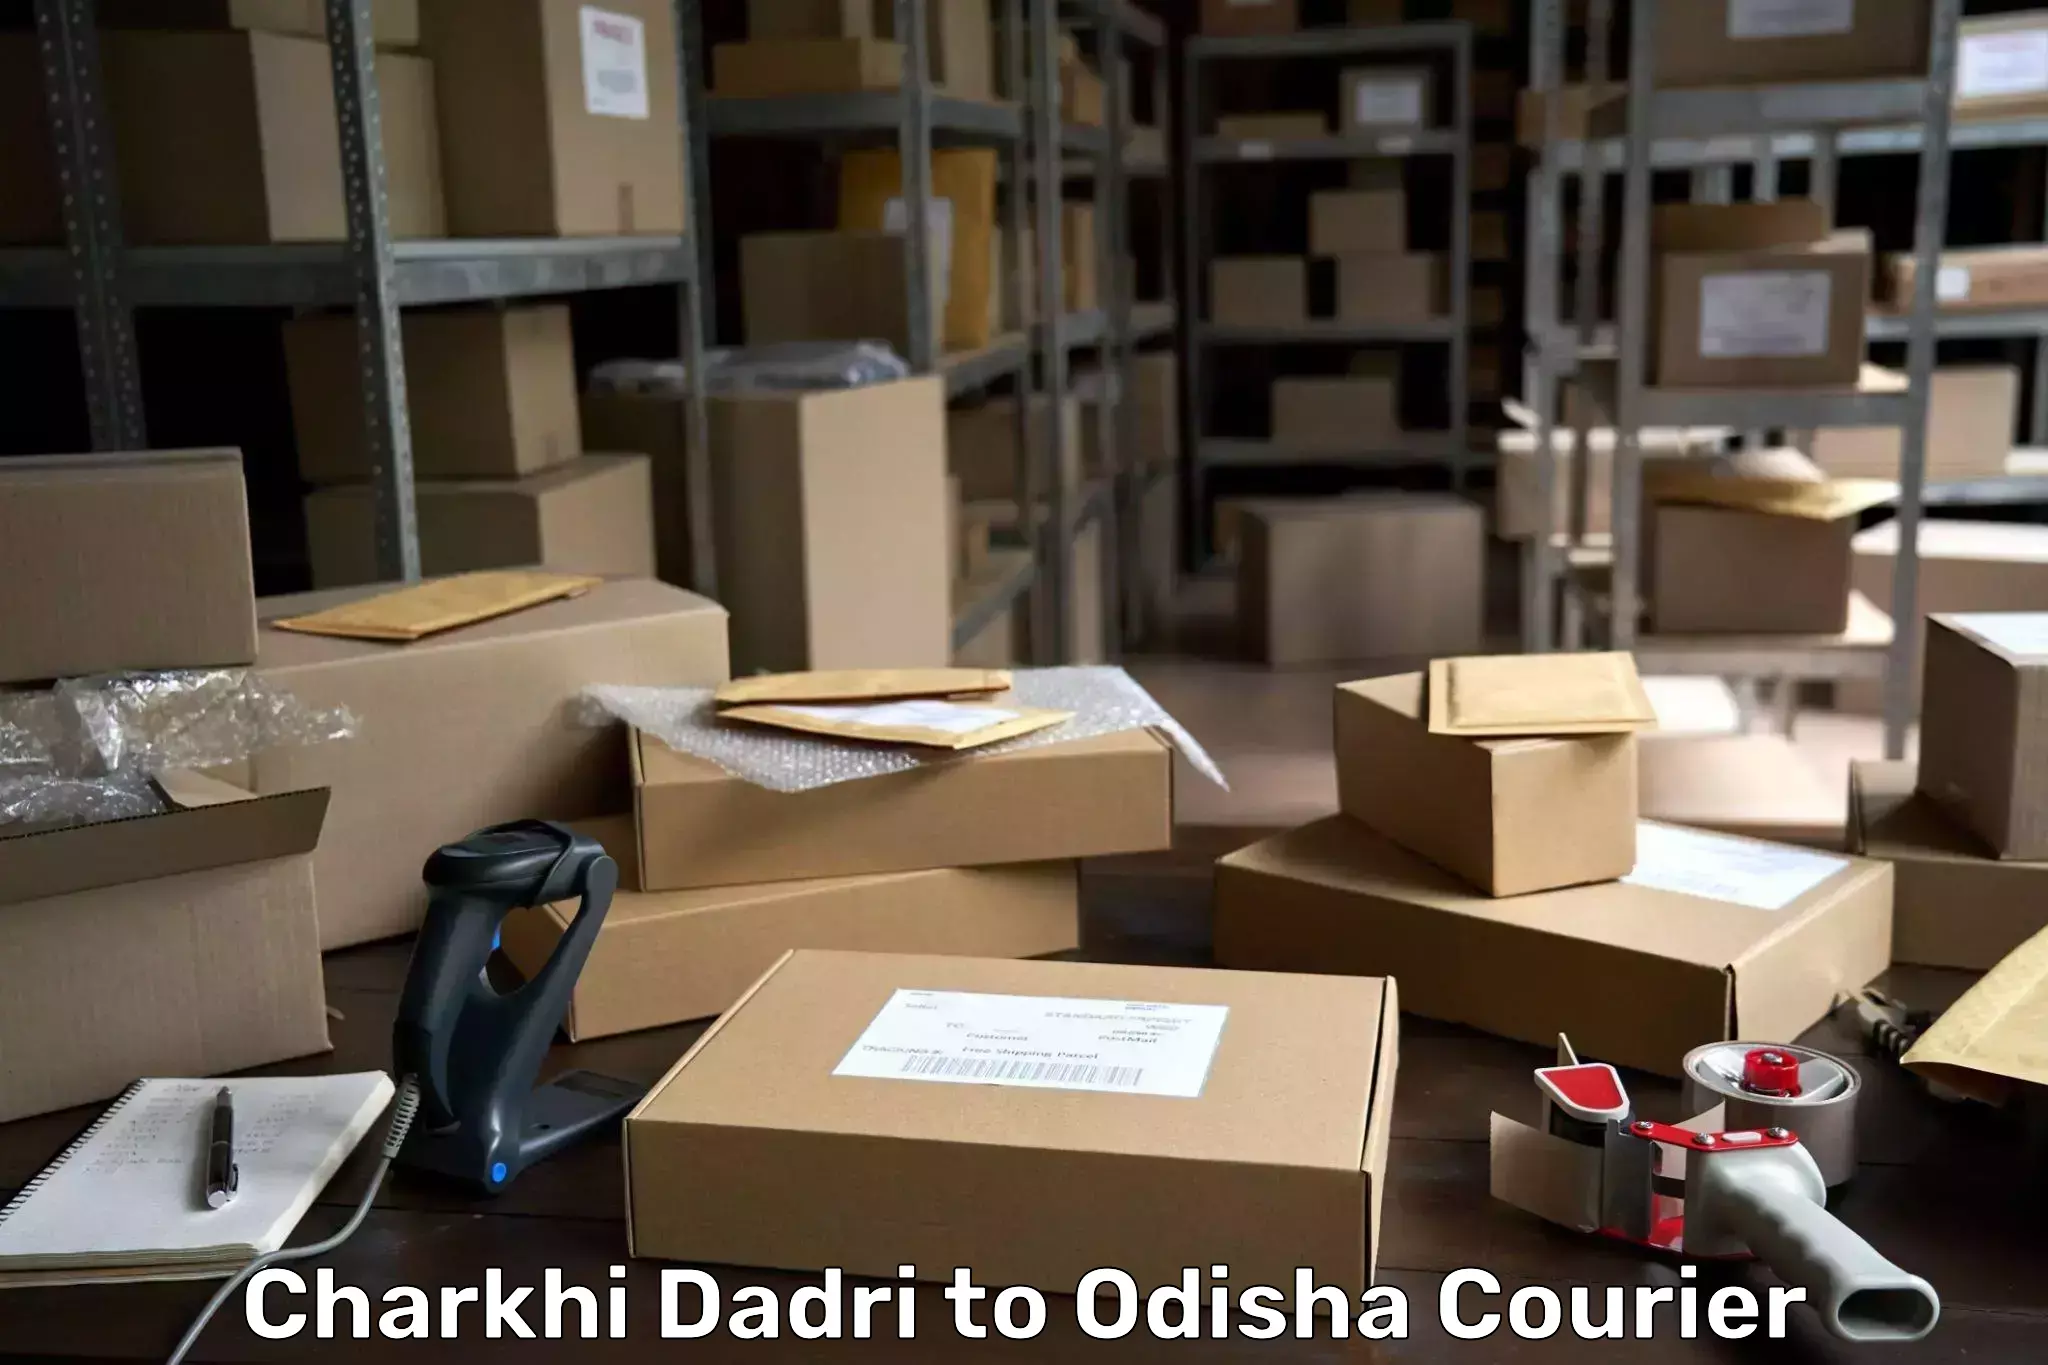 Flexible delivery scheduling in Charkhi Dadri to Mathili